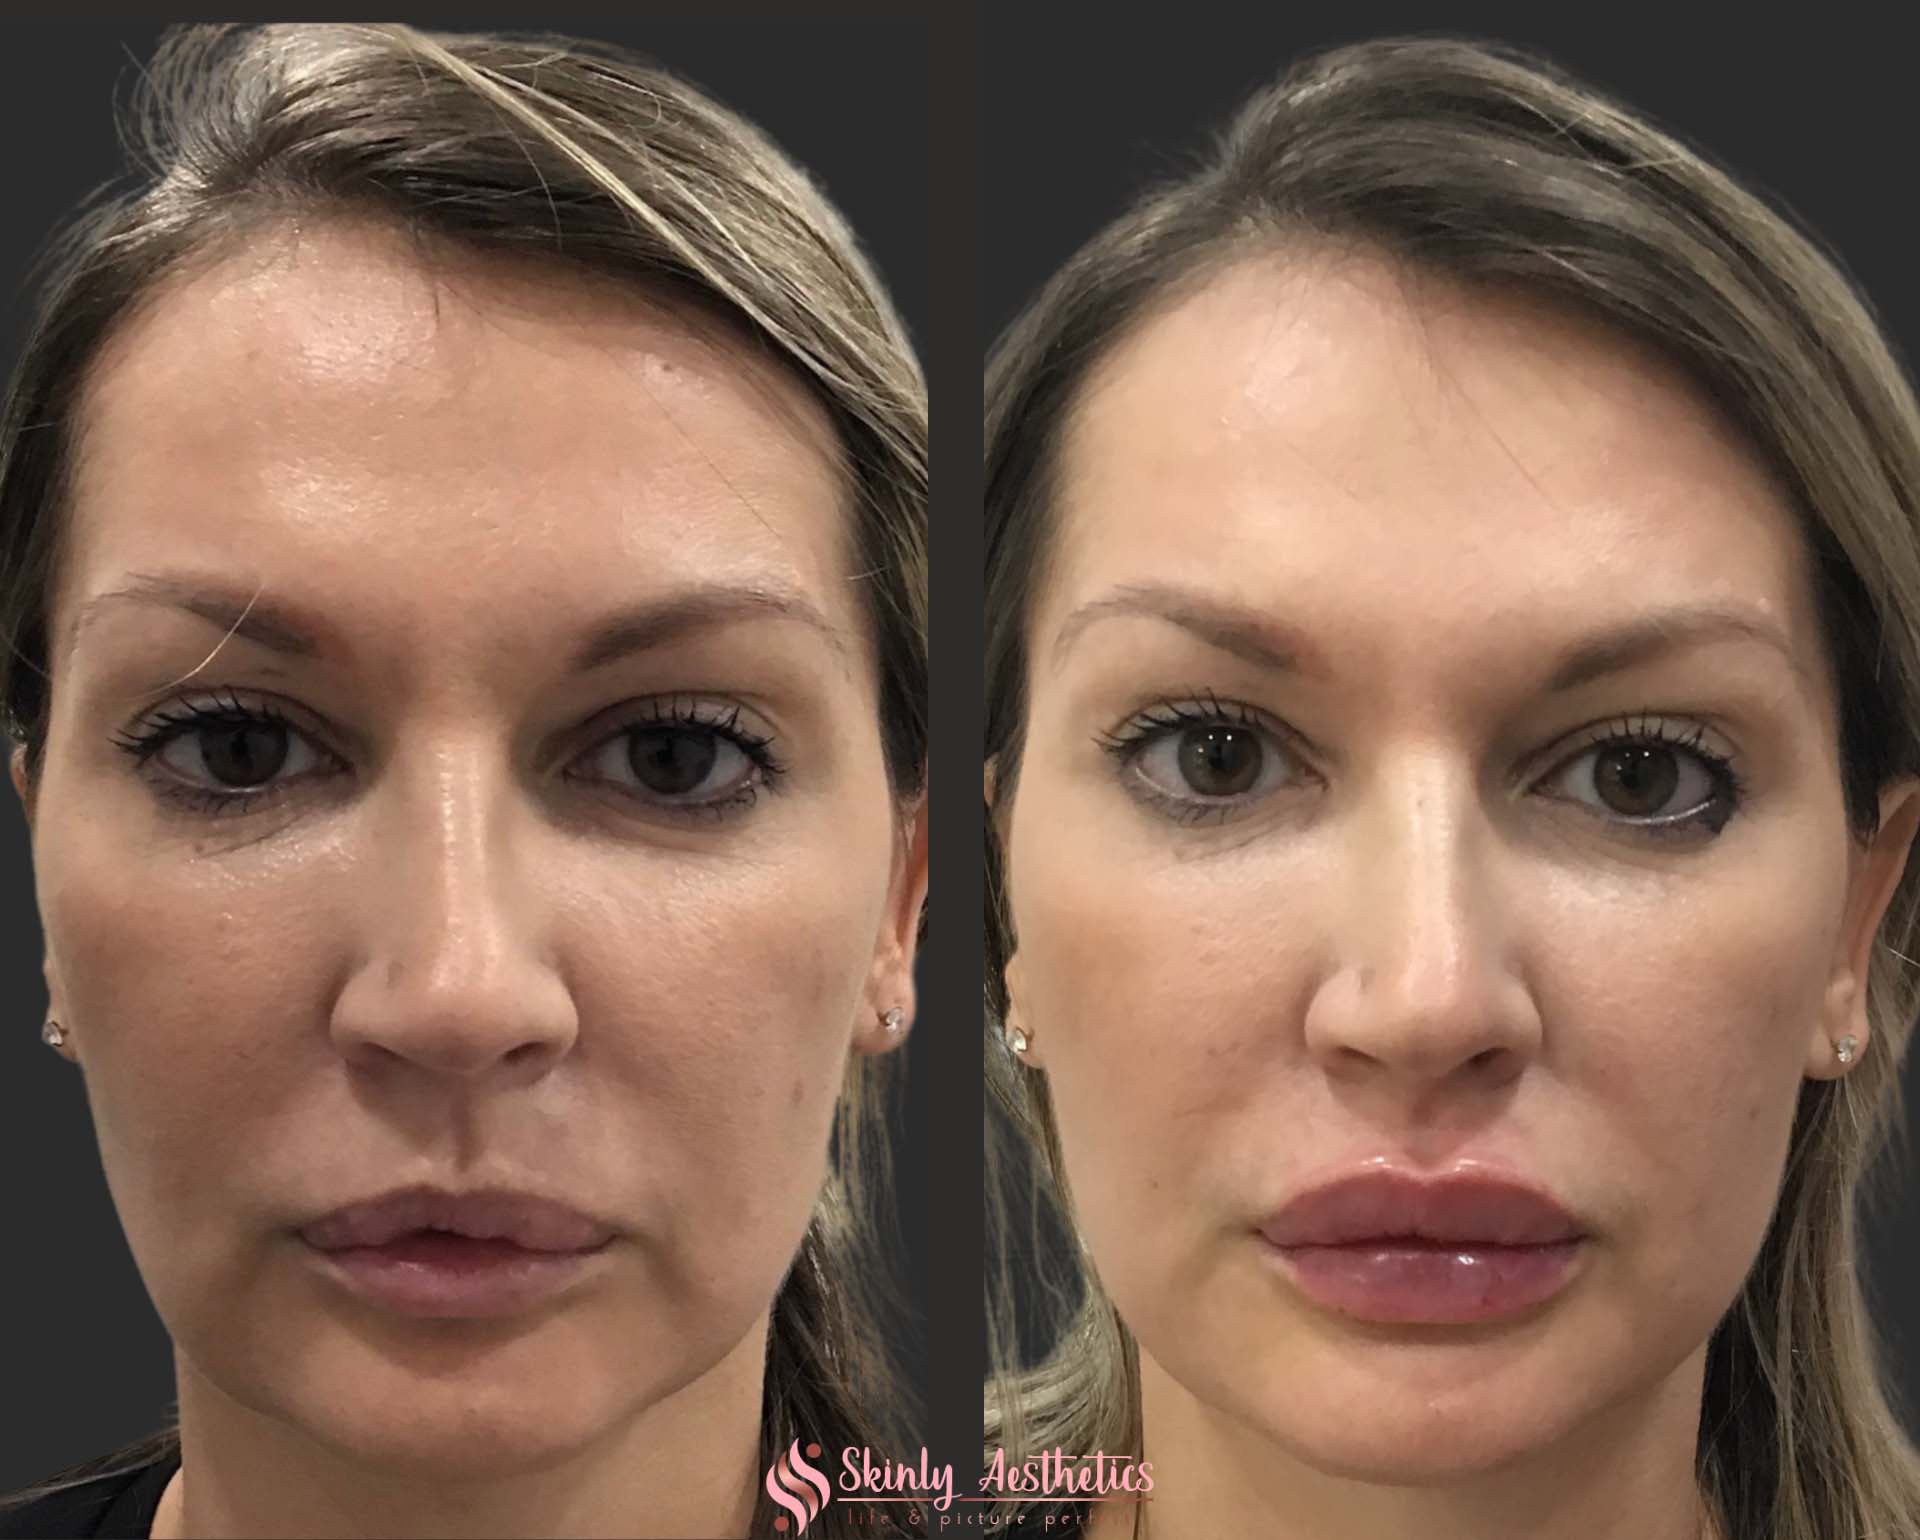 Russian style lip filler injection